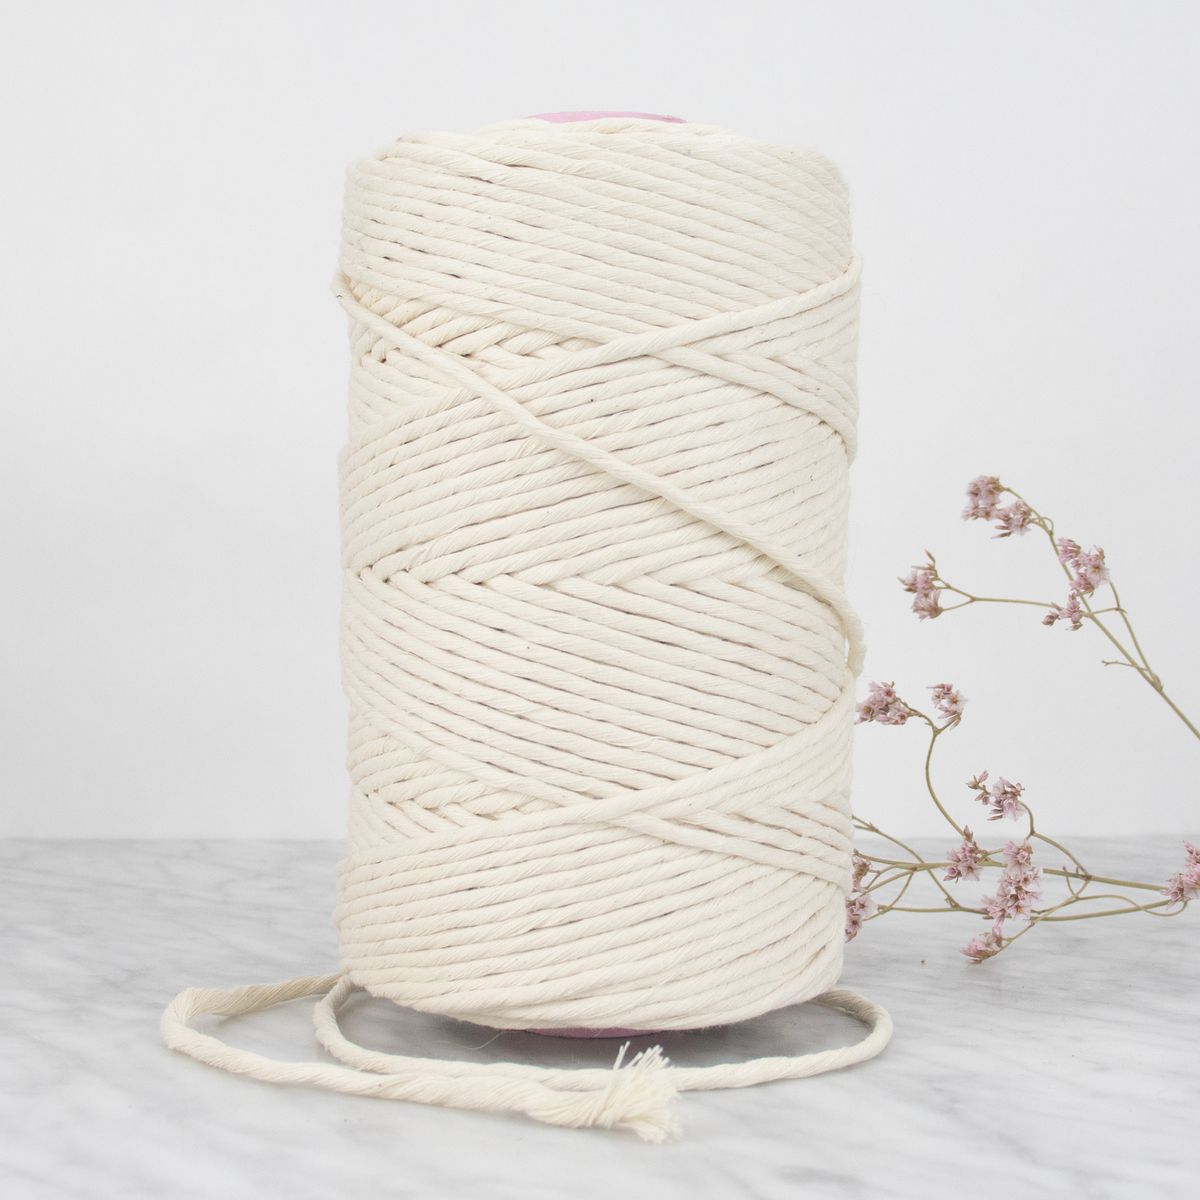 5mm Recycled Cotton String - Natural - 1 kg